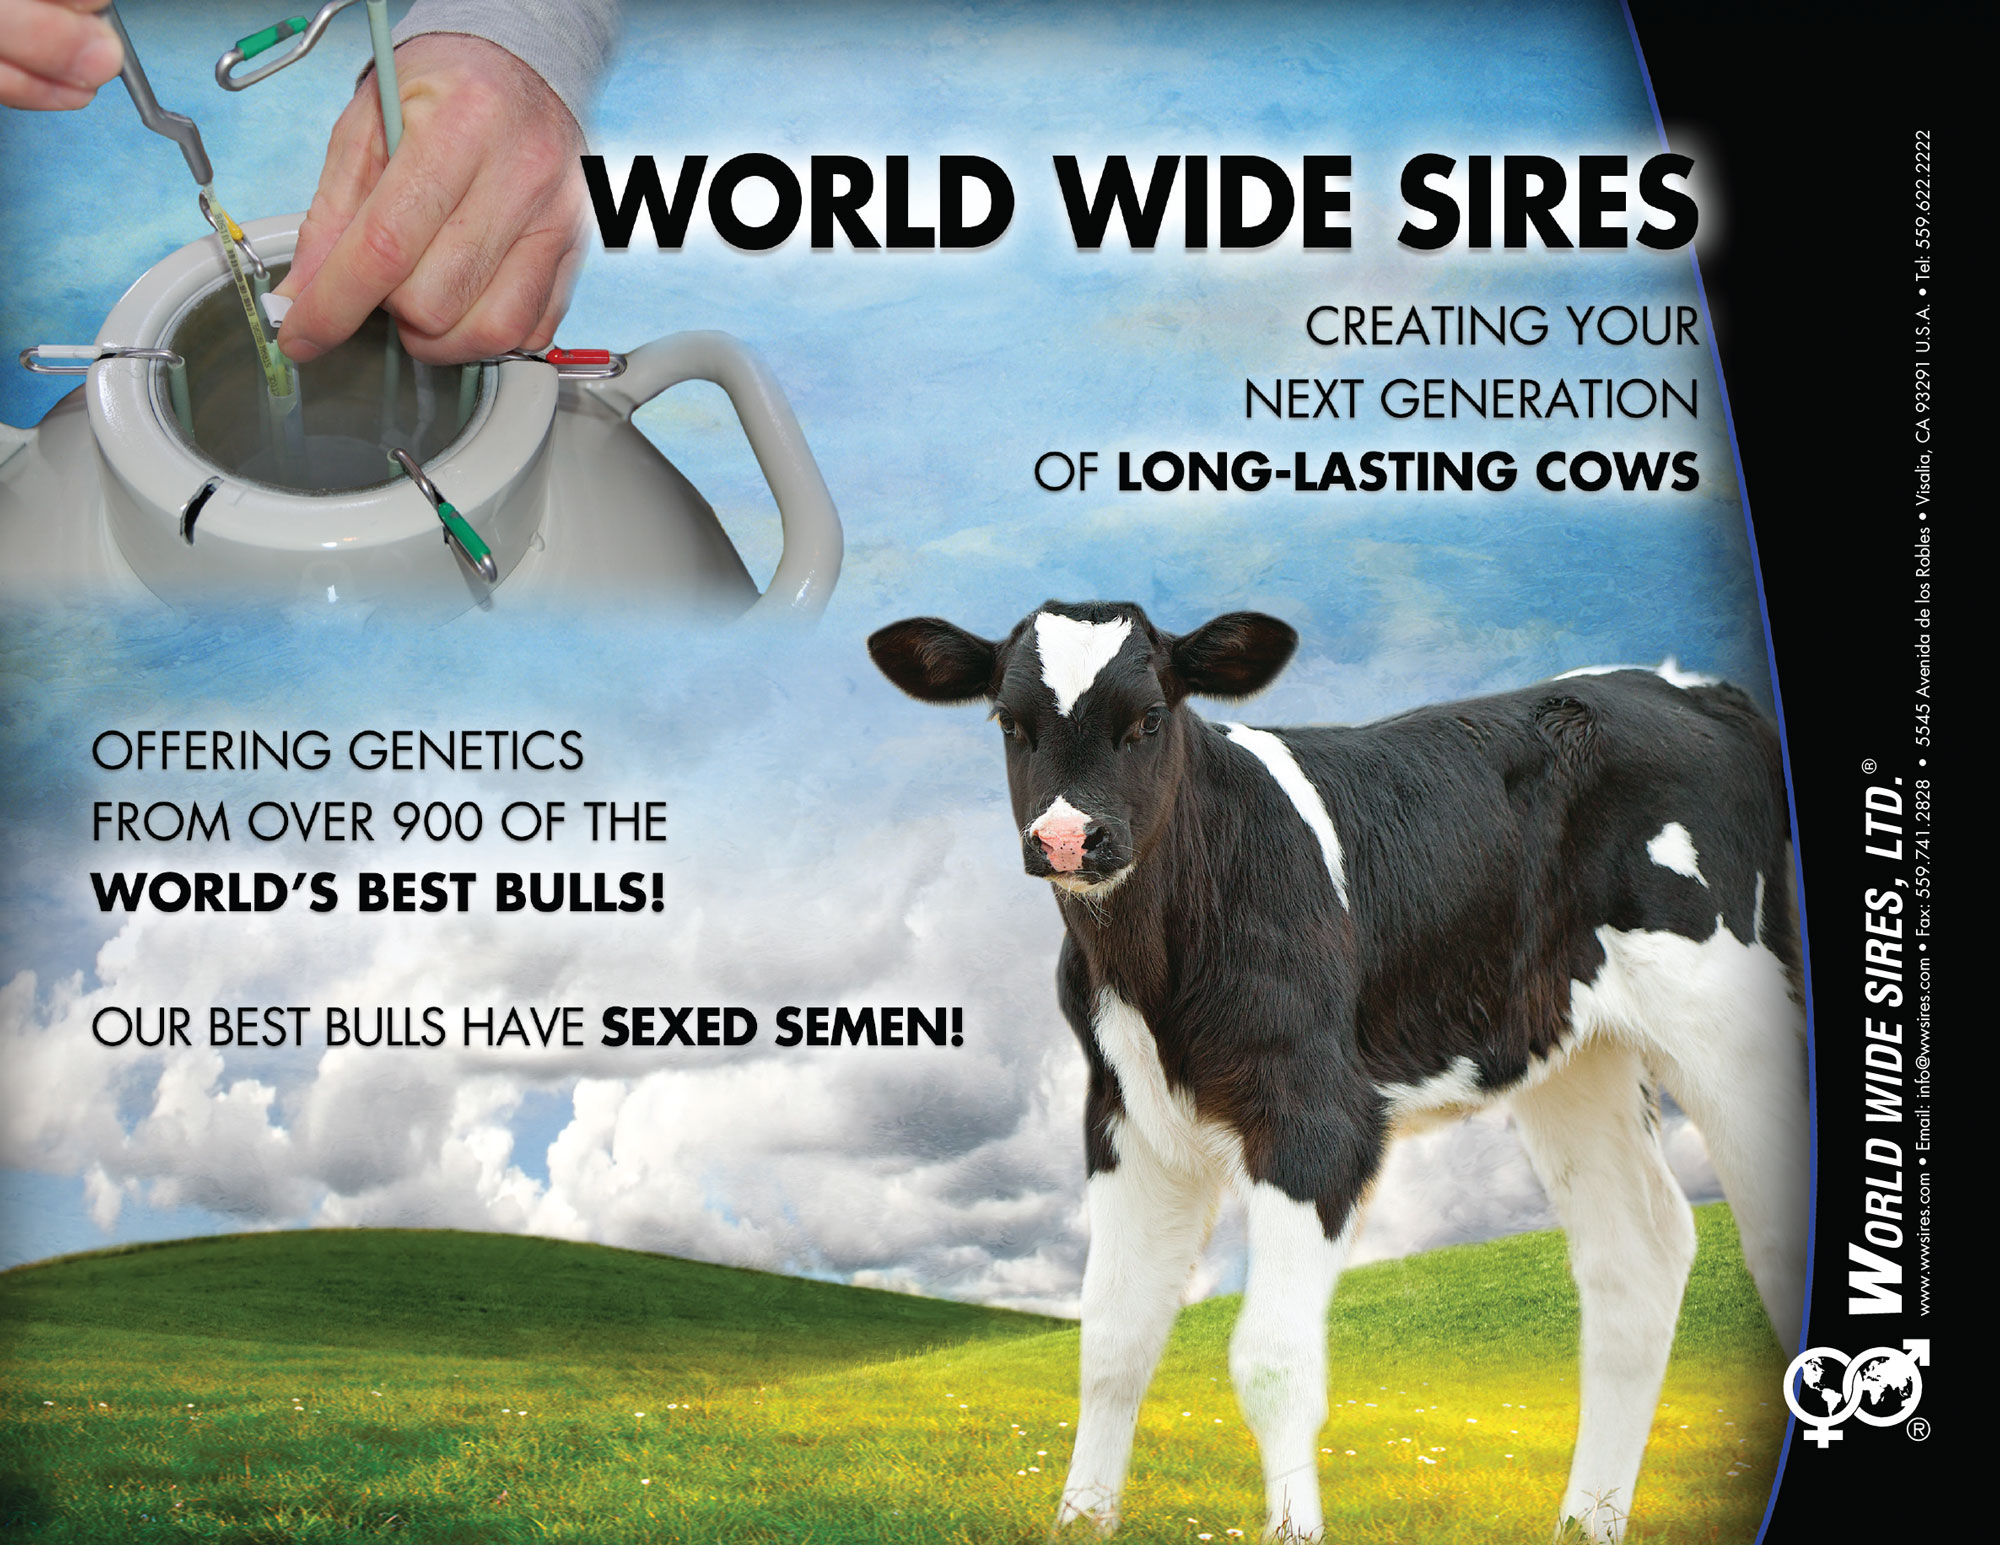 World Wide Sires ad